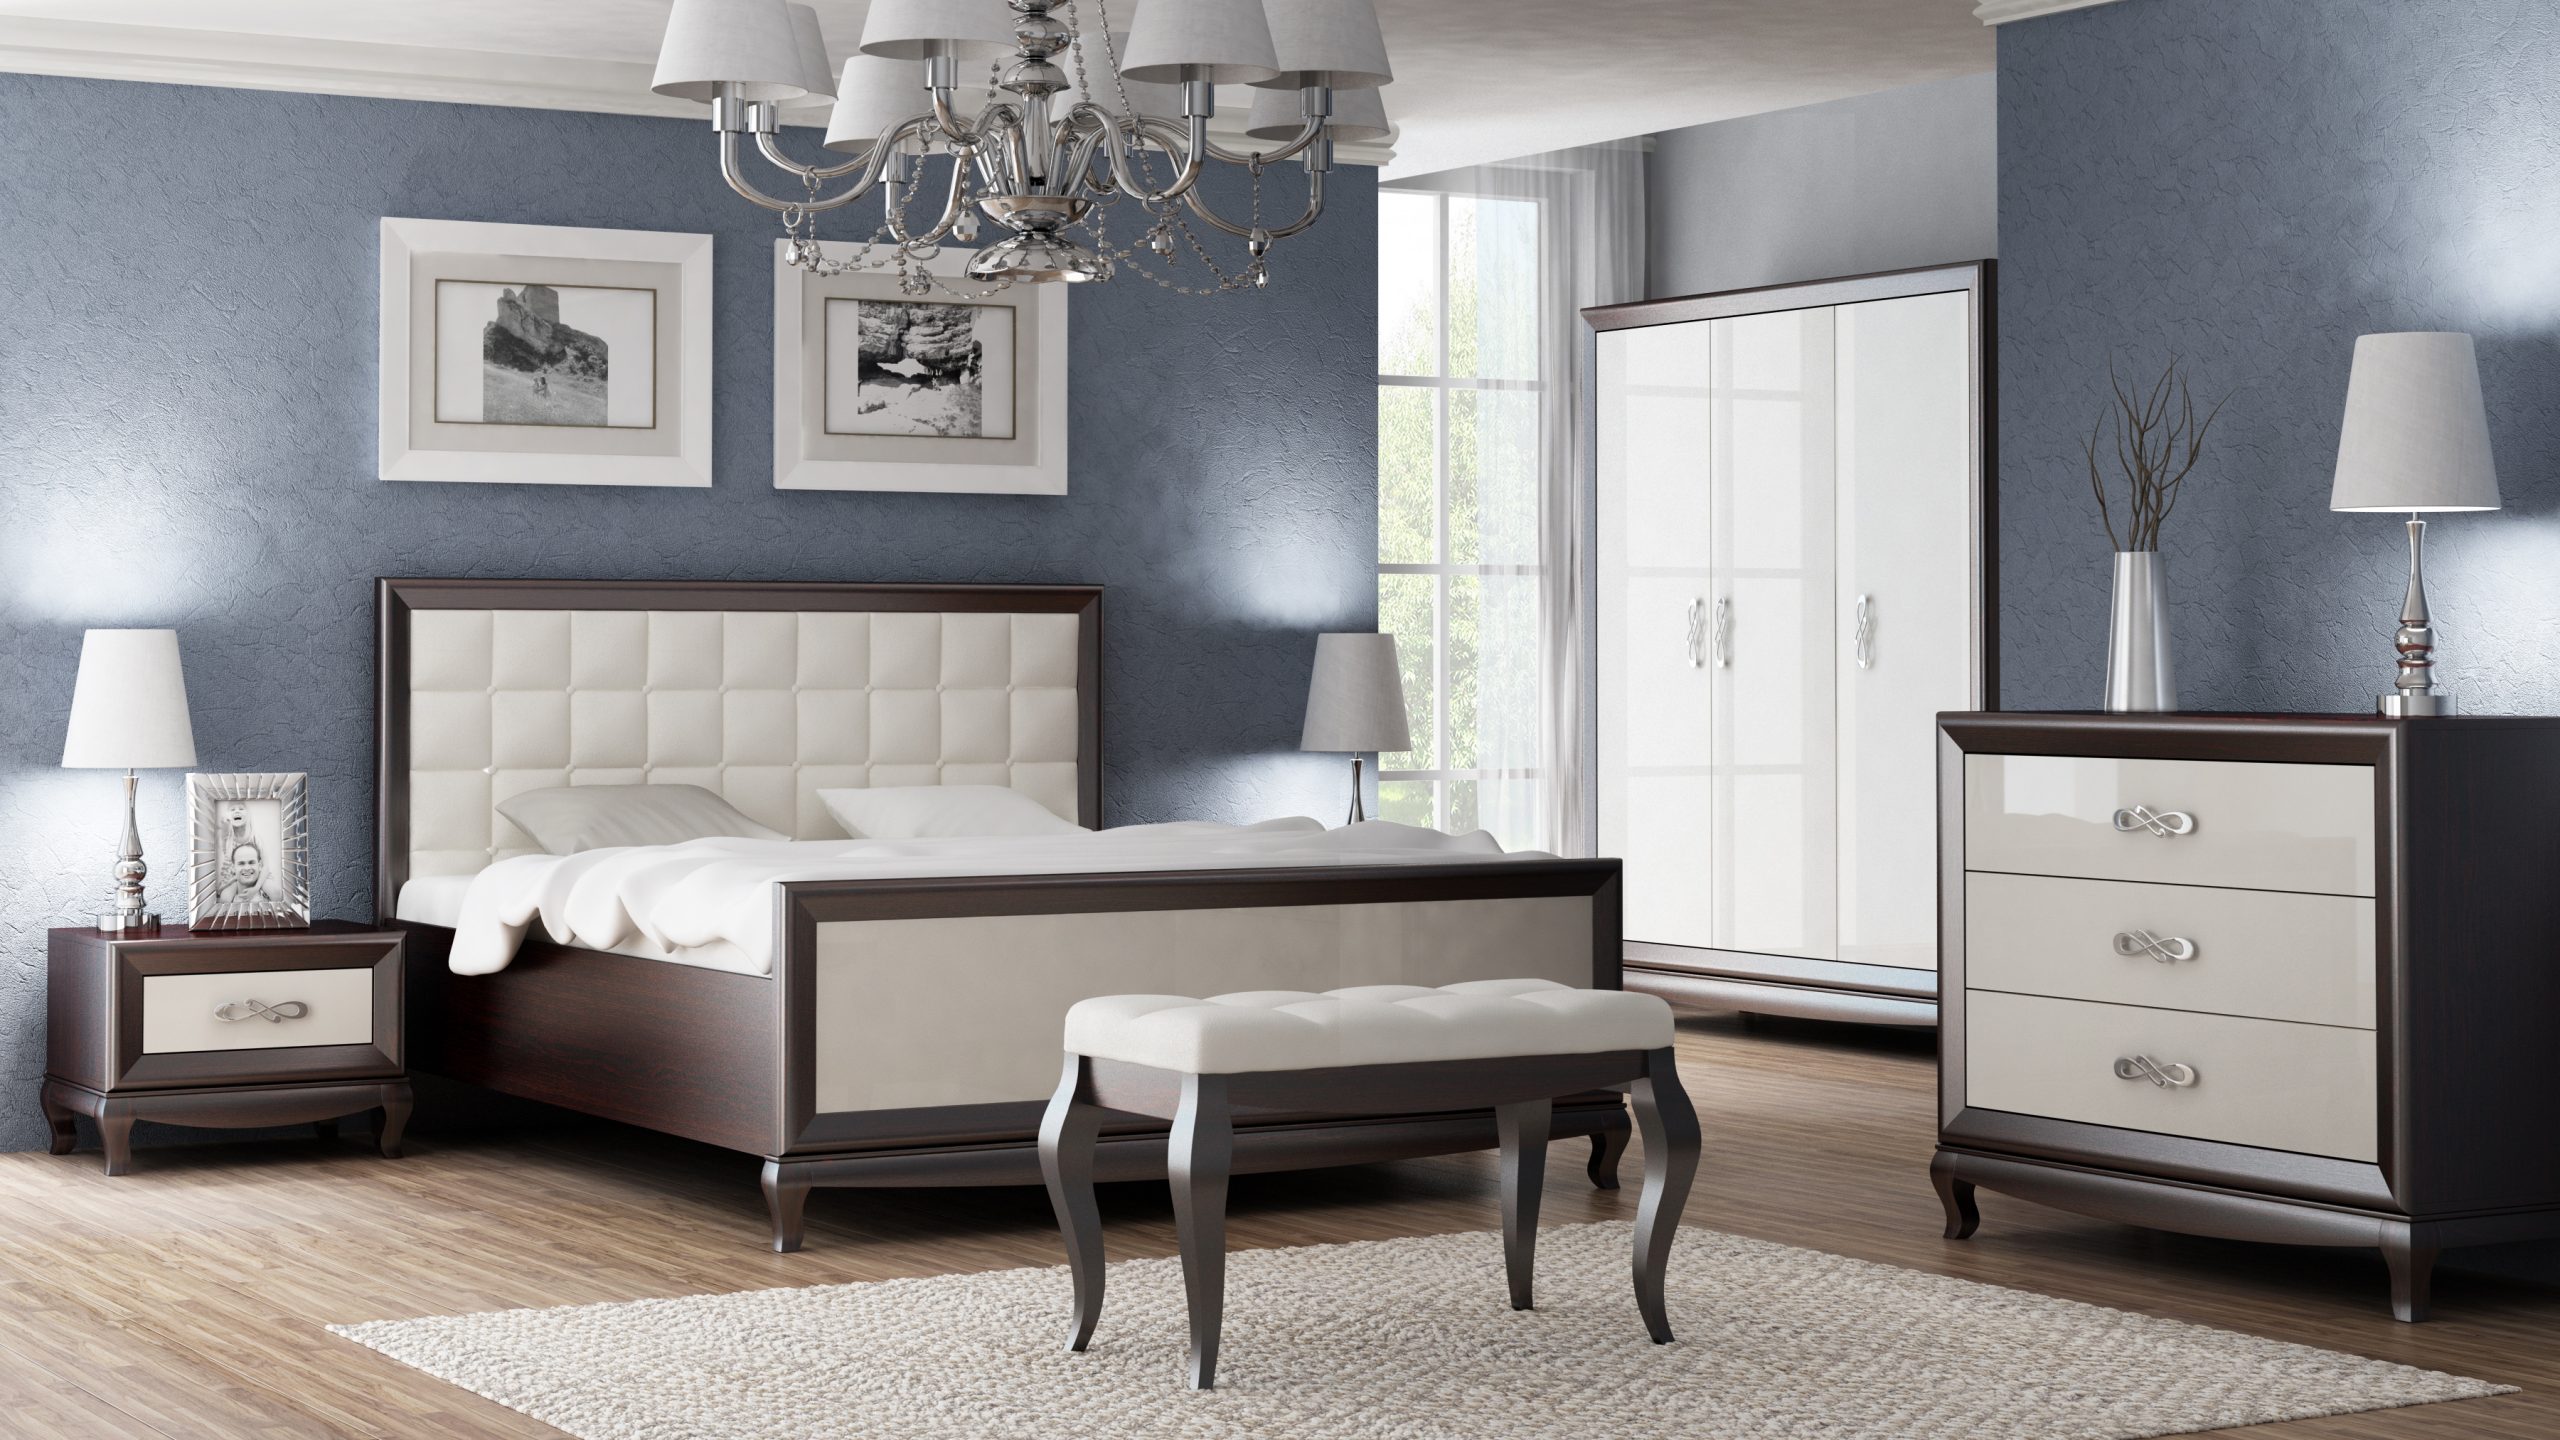 The visualisation shows a bedroom with furniture from the Sofia collection. A large bed with a quilted headrest, bedside tables, a chest of drawers and a bench. The drawers have decorative handles.